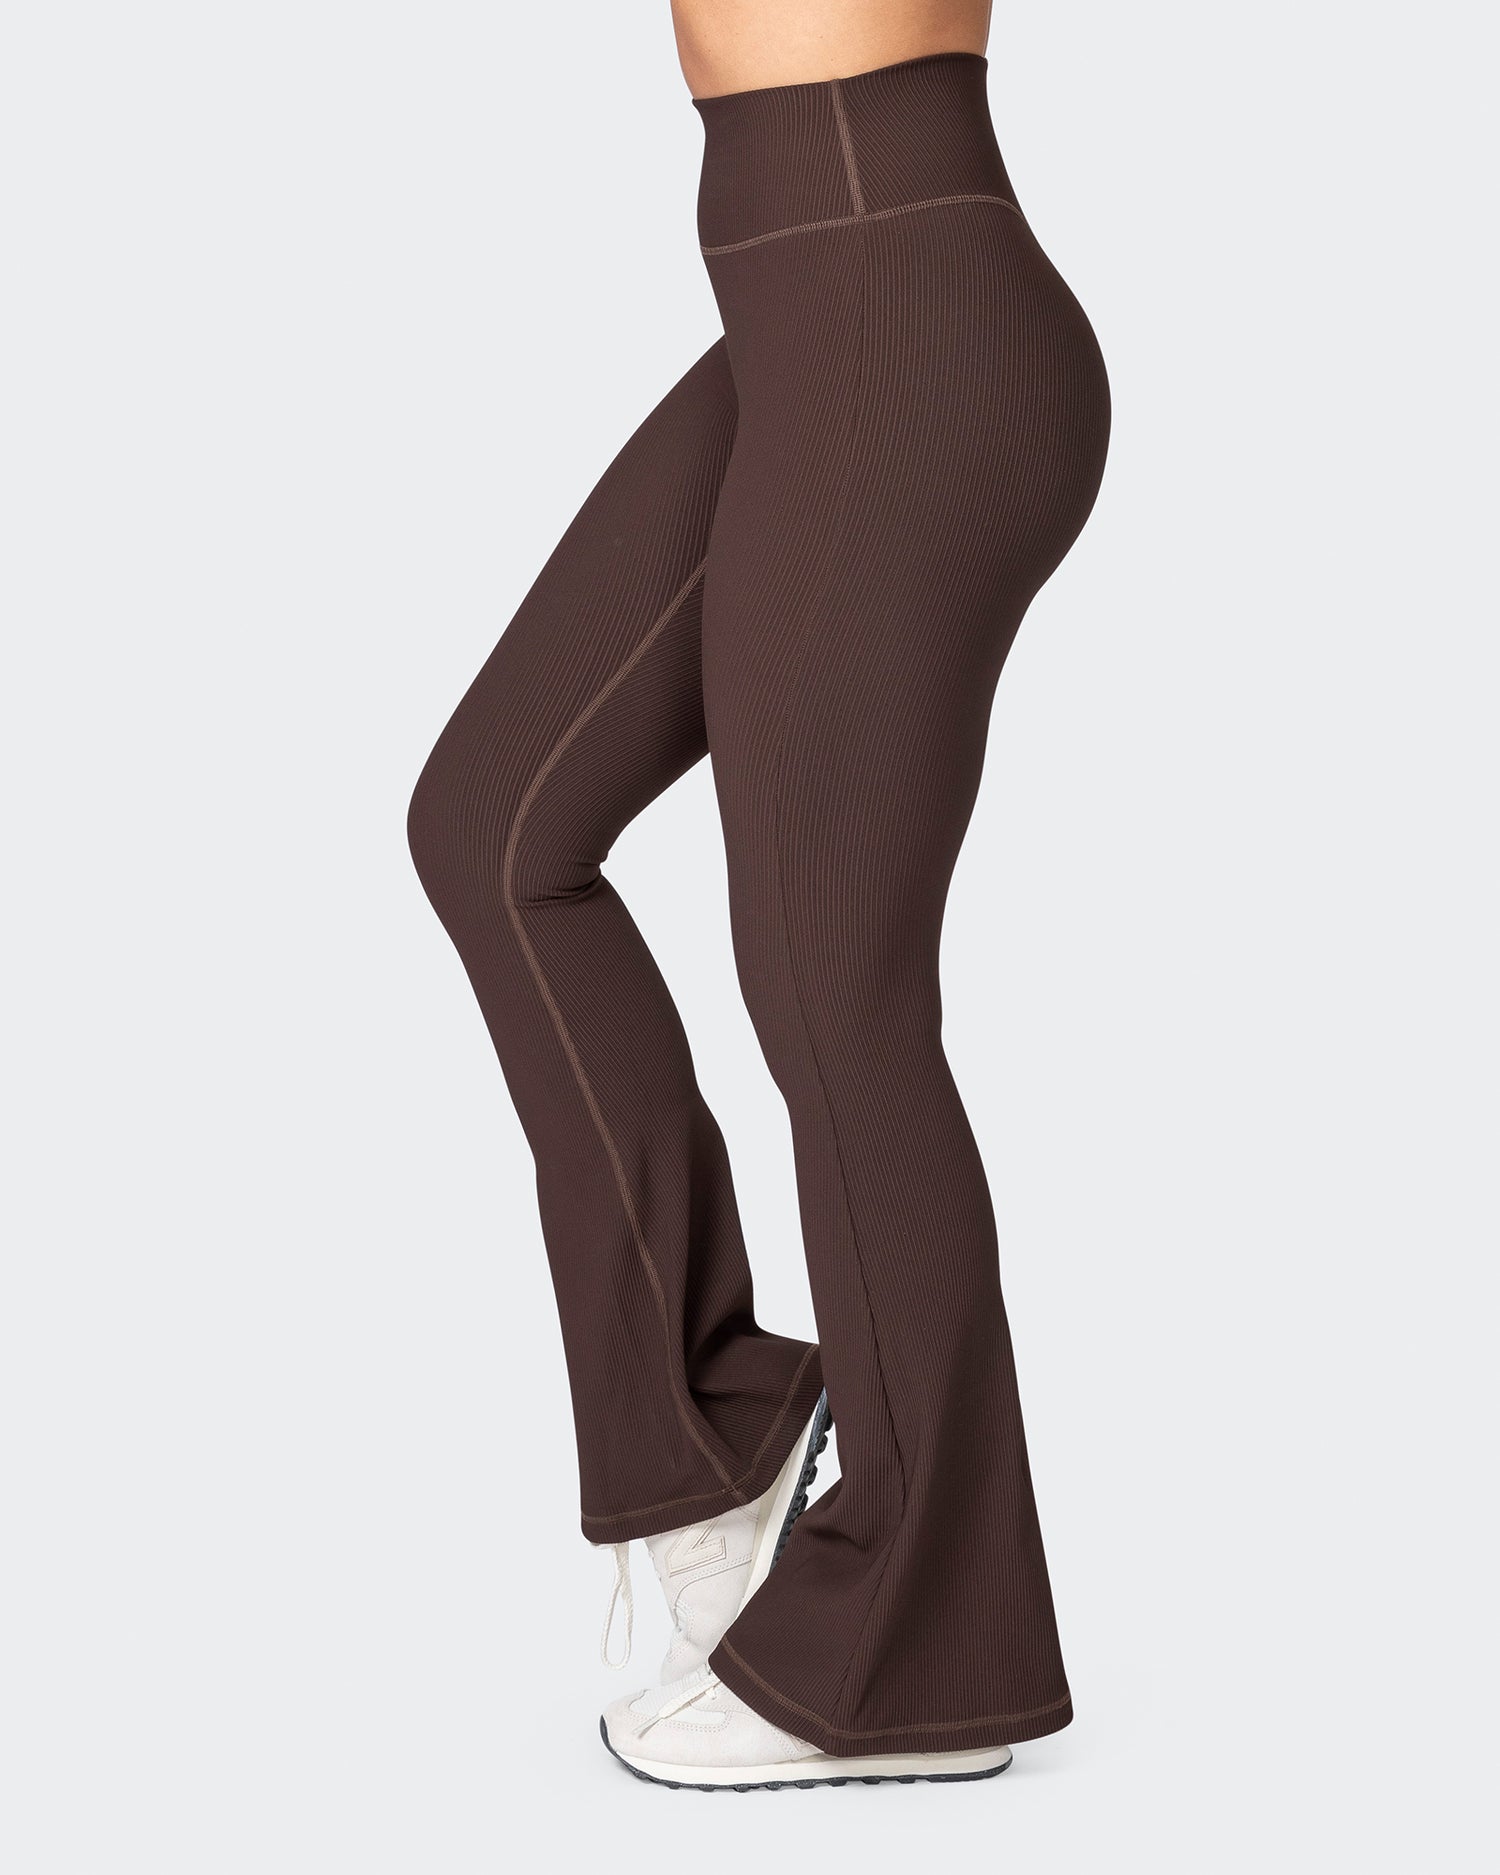 Everyday Flare Leggings in Cocoa (Small-3XL)